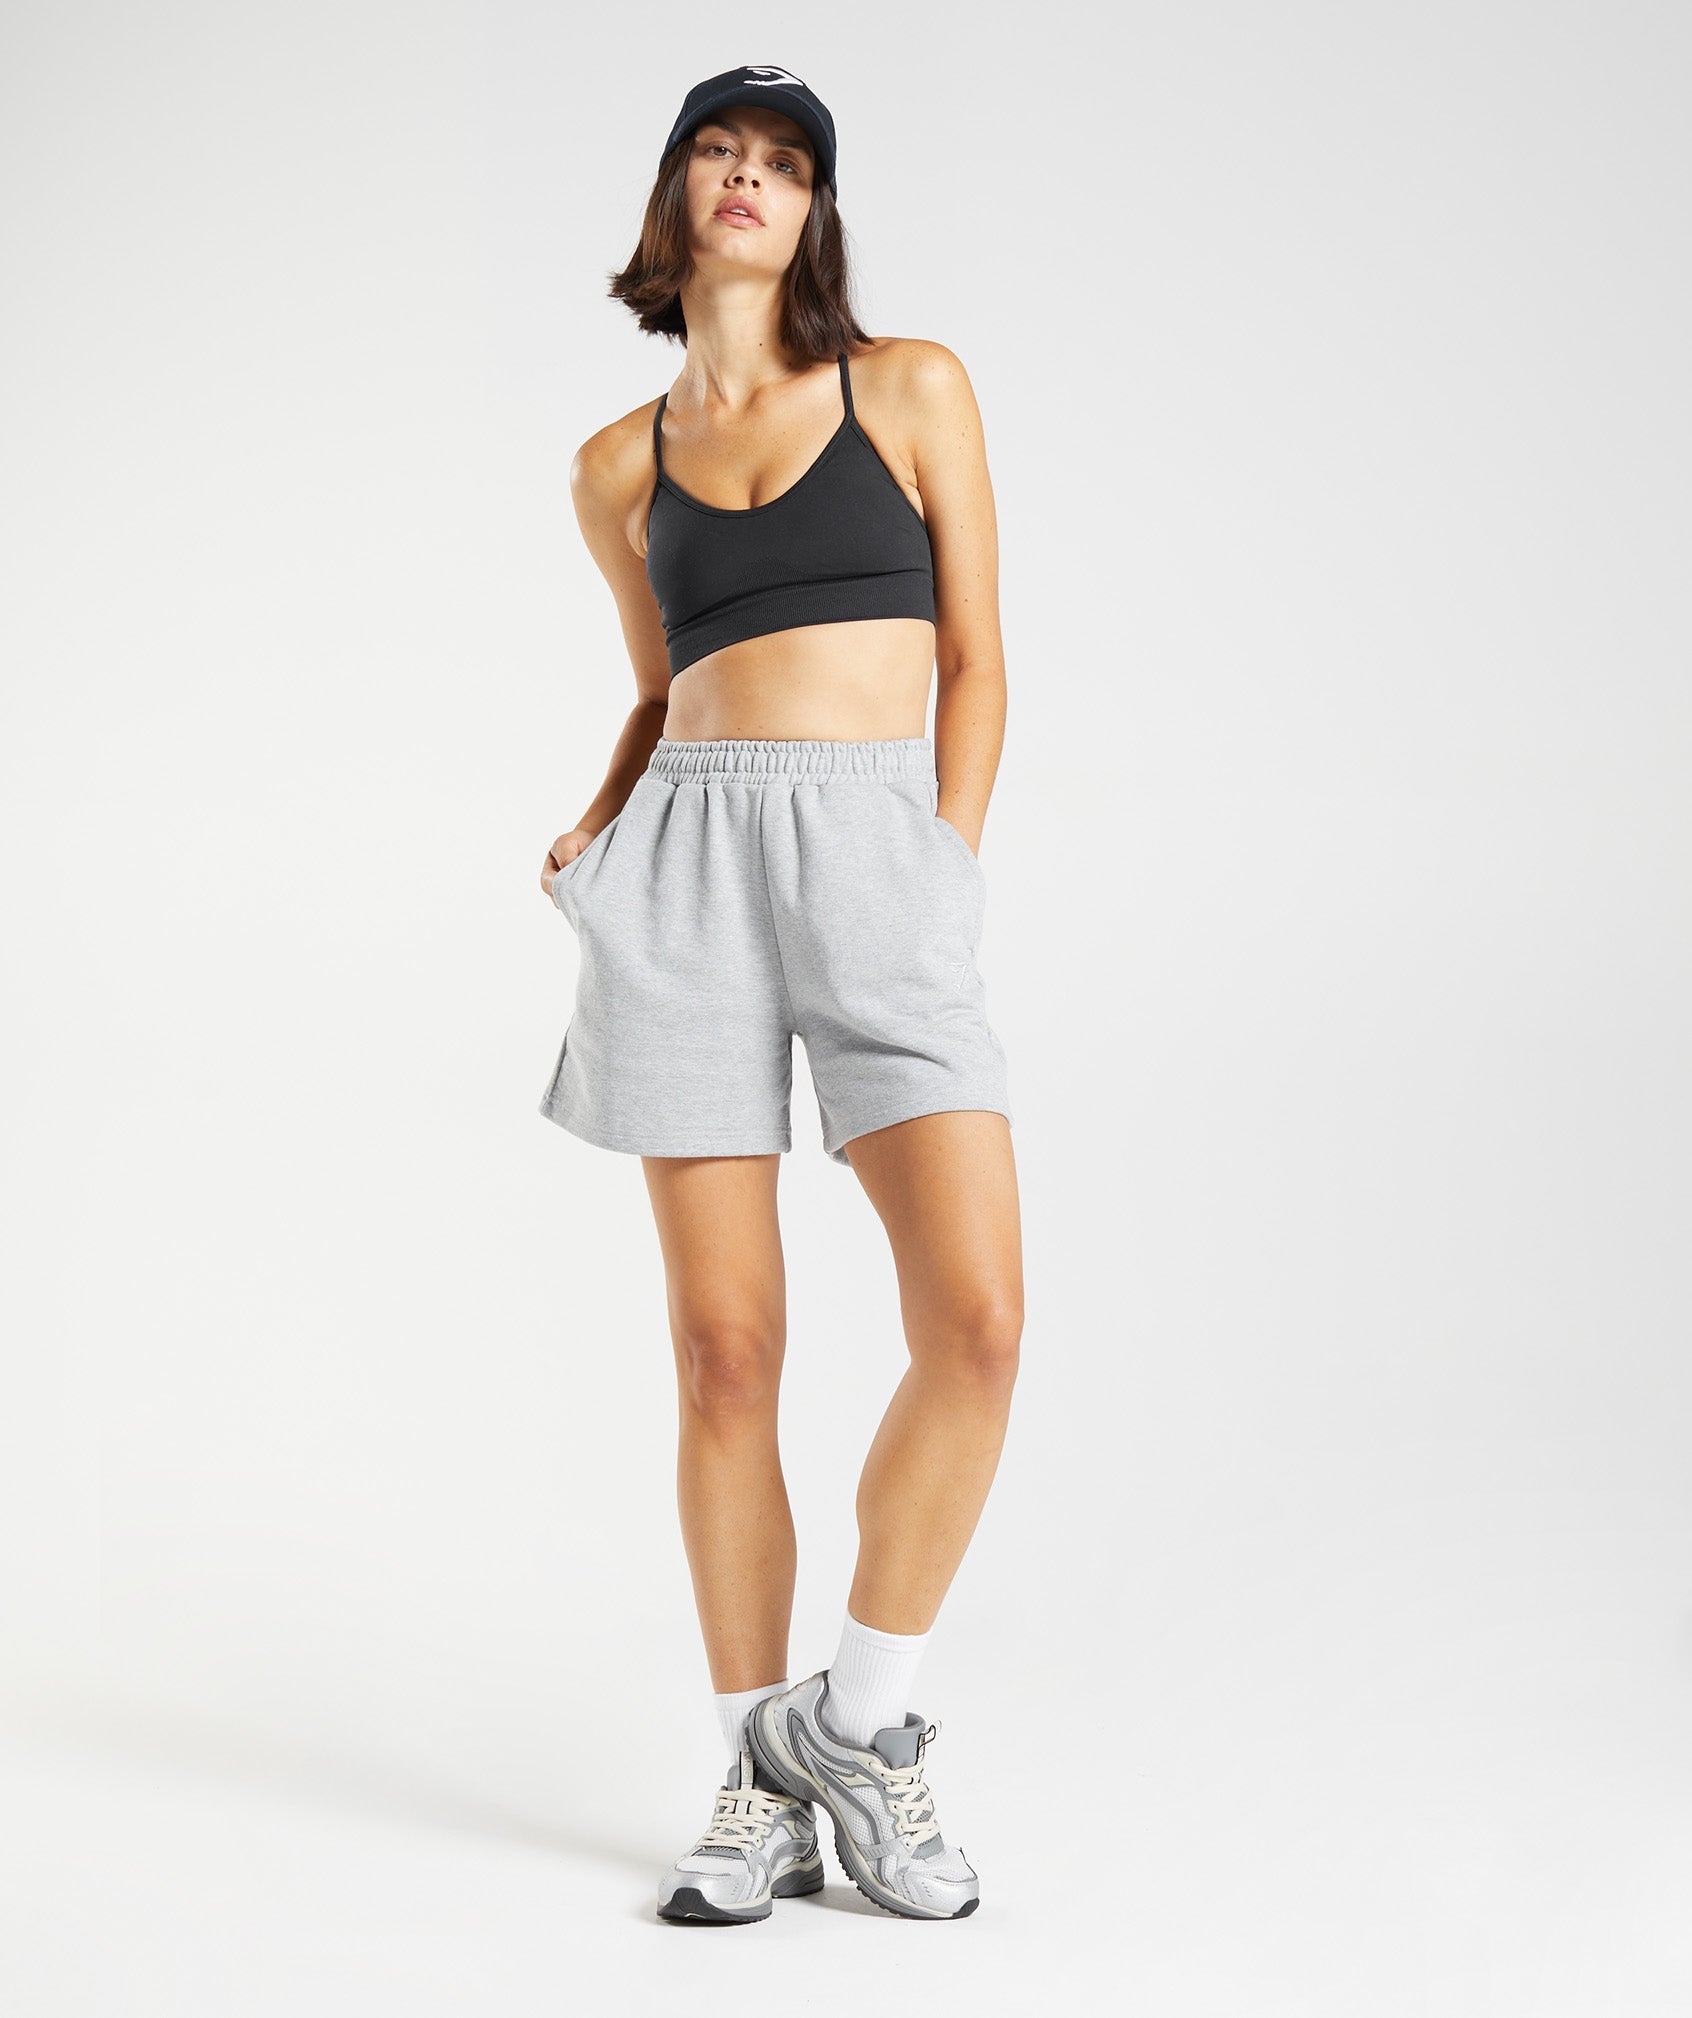 Rest Day Sweats Shorts in Light Grey Core Marl - view 4